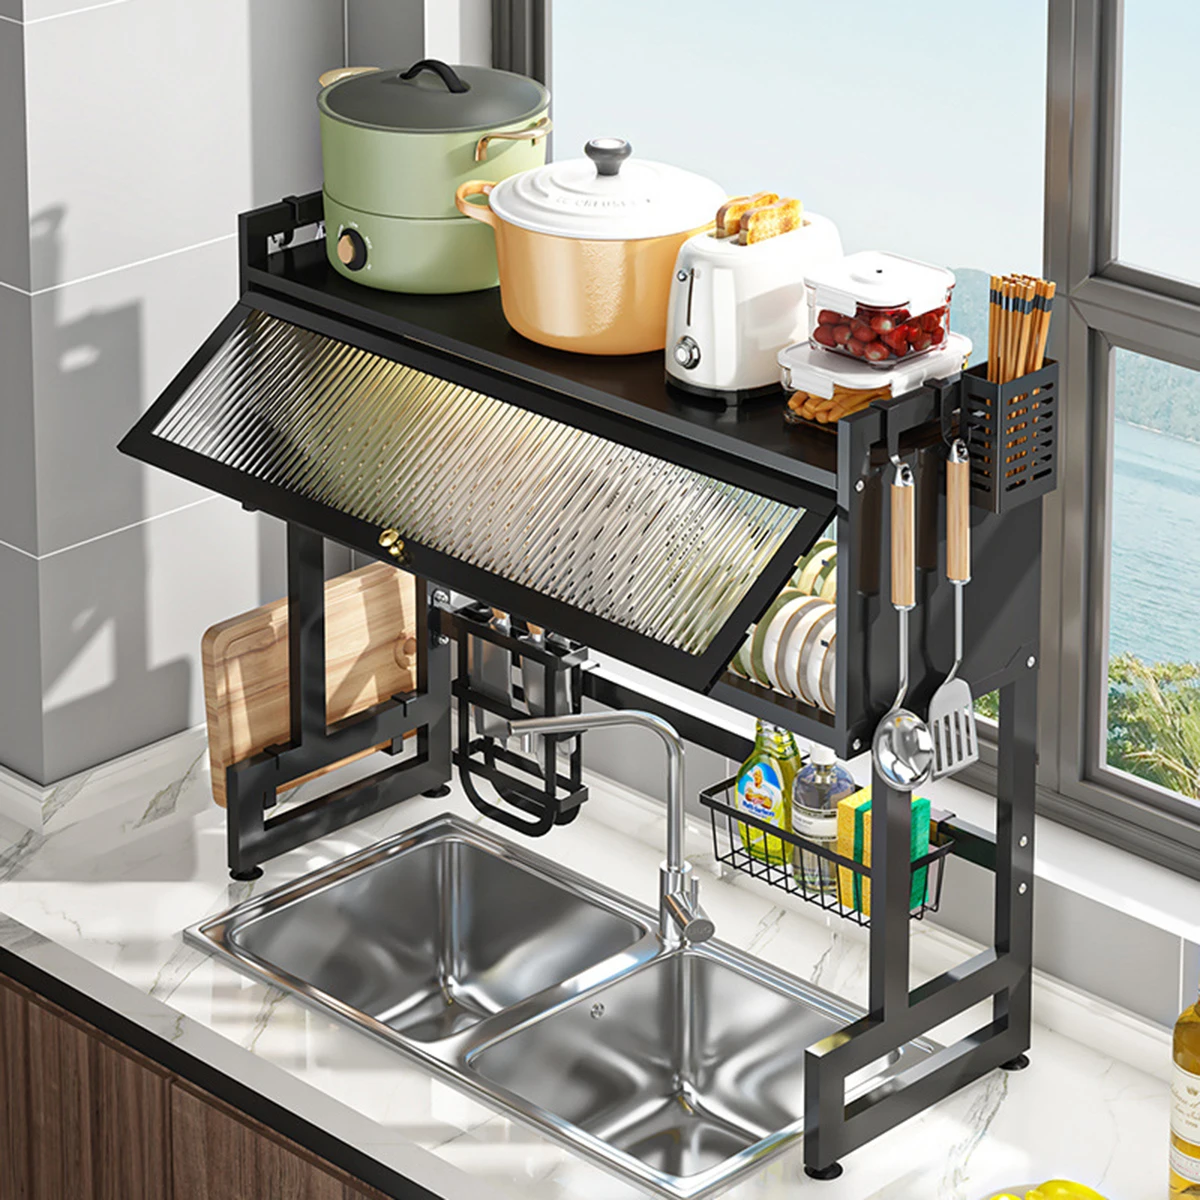 https://ae01.alicdn.com/kf/S09713d6a06974464b6ce64967d58dd0aJ/95cm-Over-The-Sink-Dish-Drying-Rack-Space-Saving-Kitchen-Sink-Rack-Perfect-for-Above-Sink.jpg